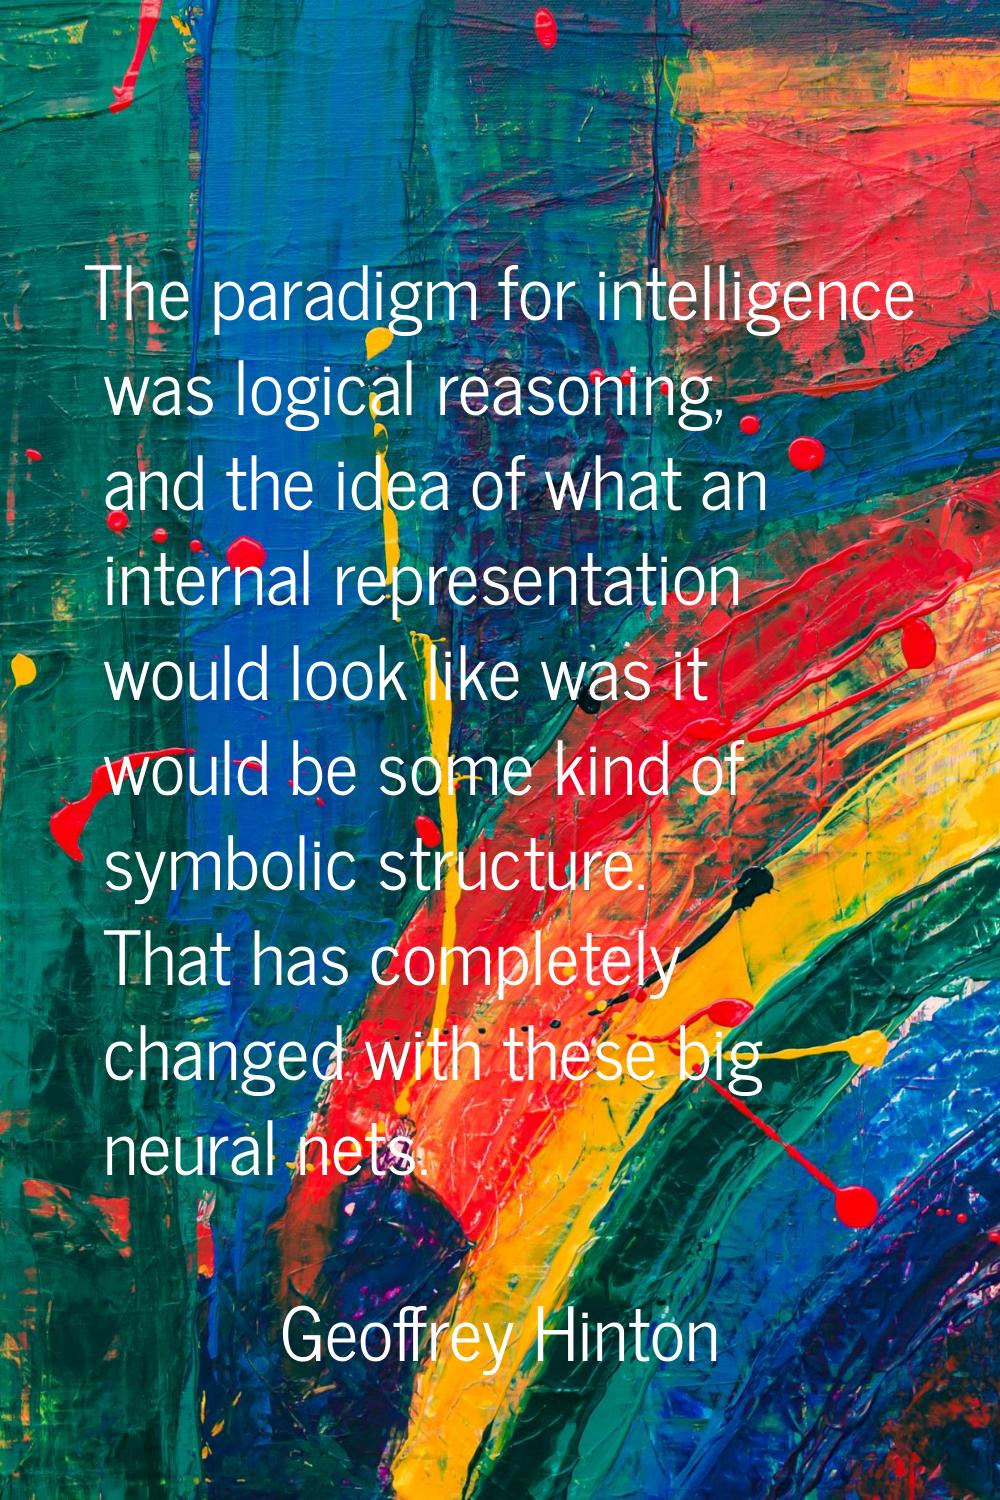 The paradigm for intelligence was logical reasoning, and the idea of what an internal representatio